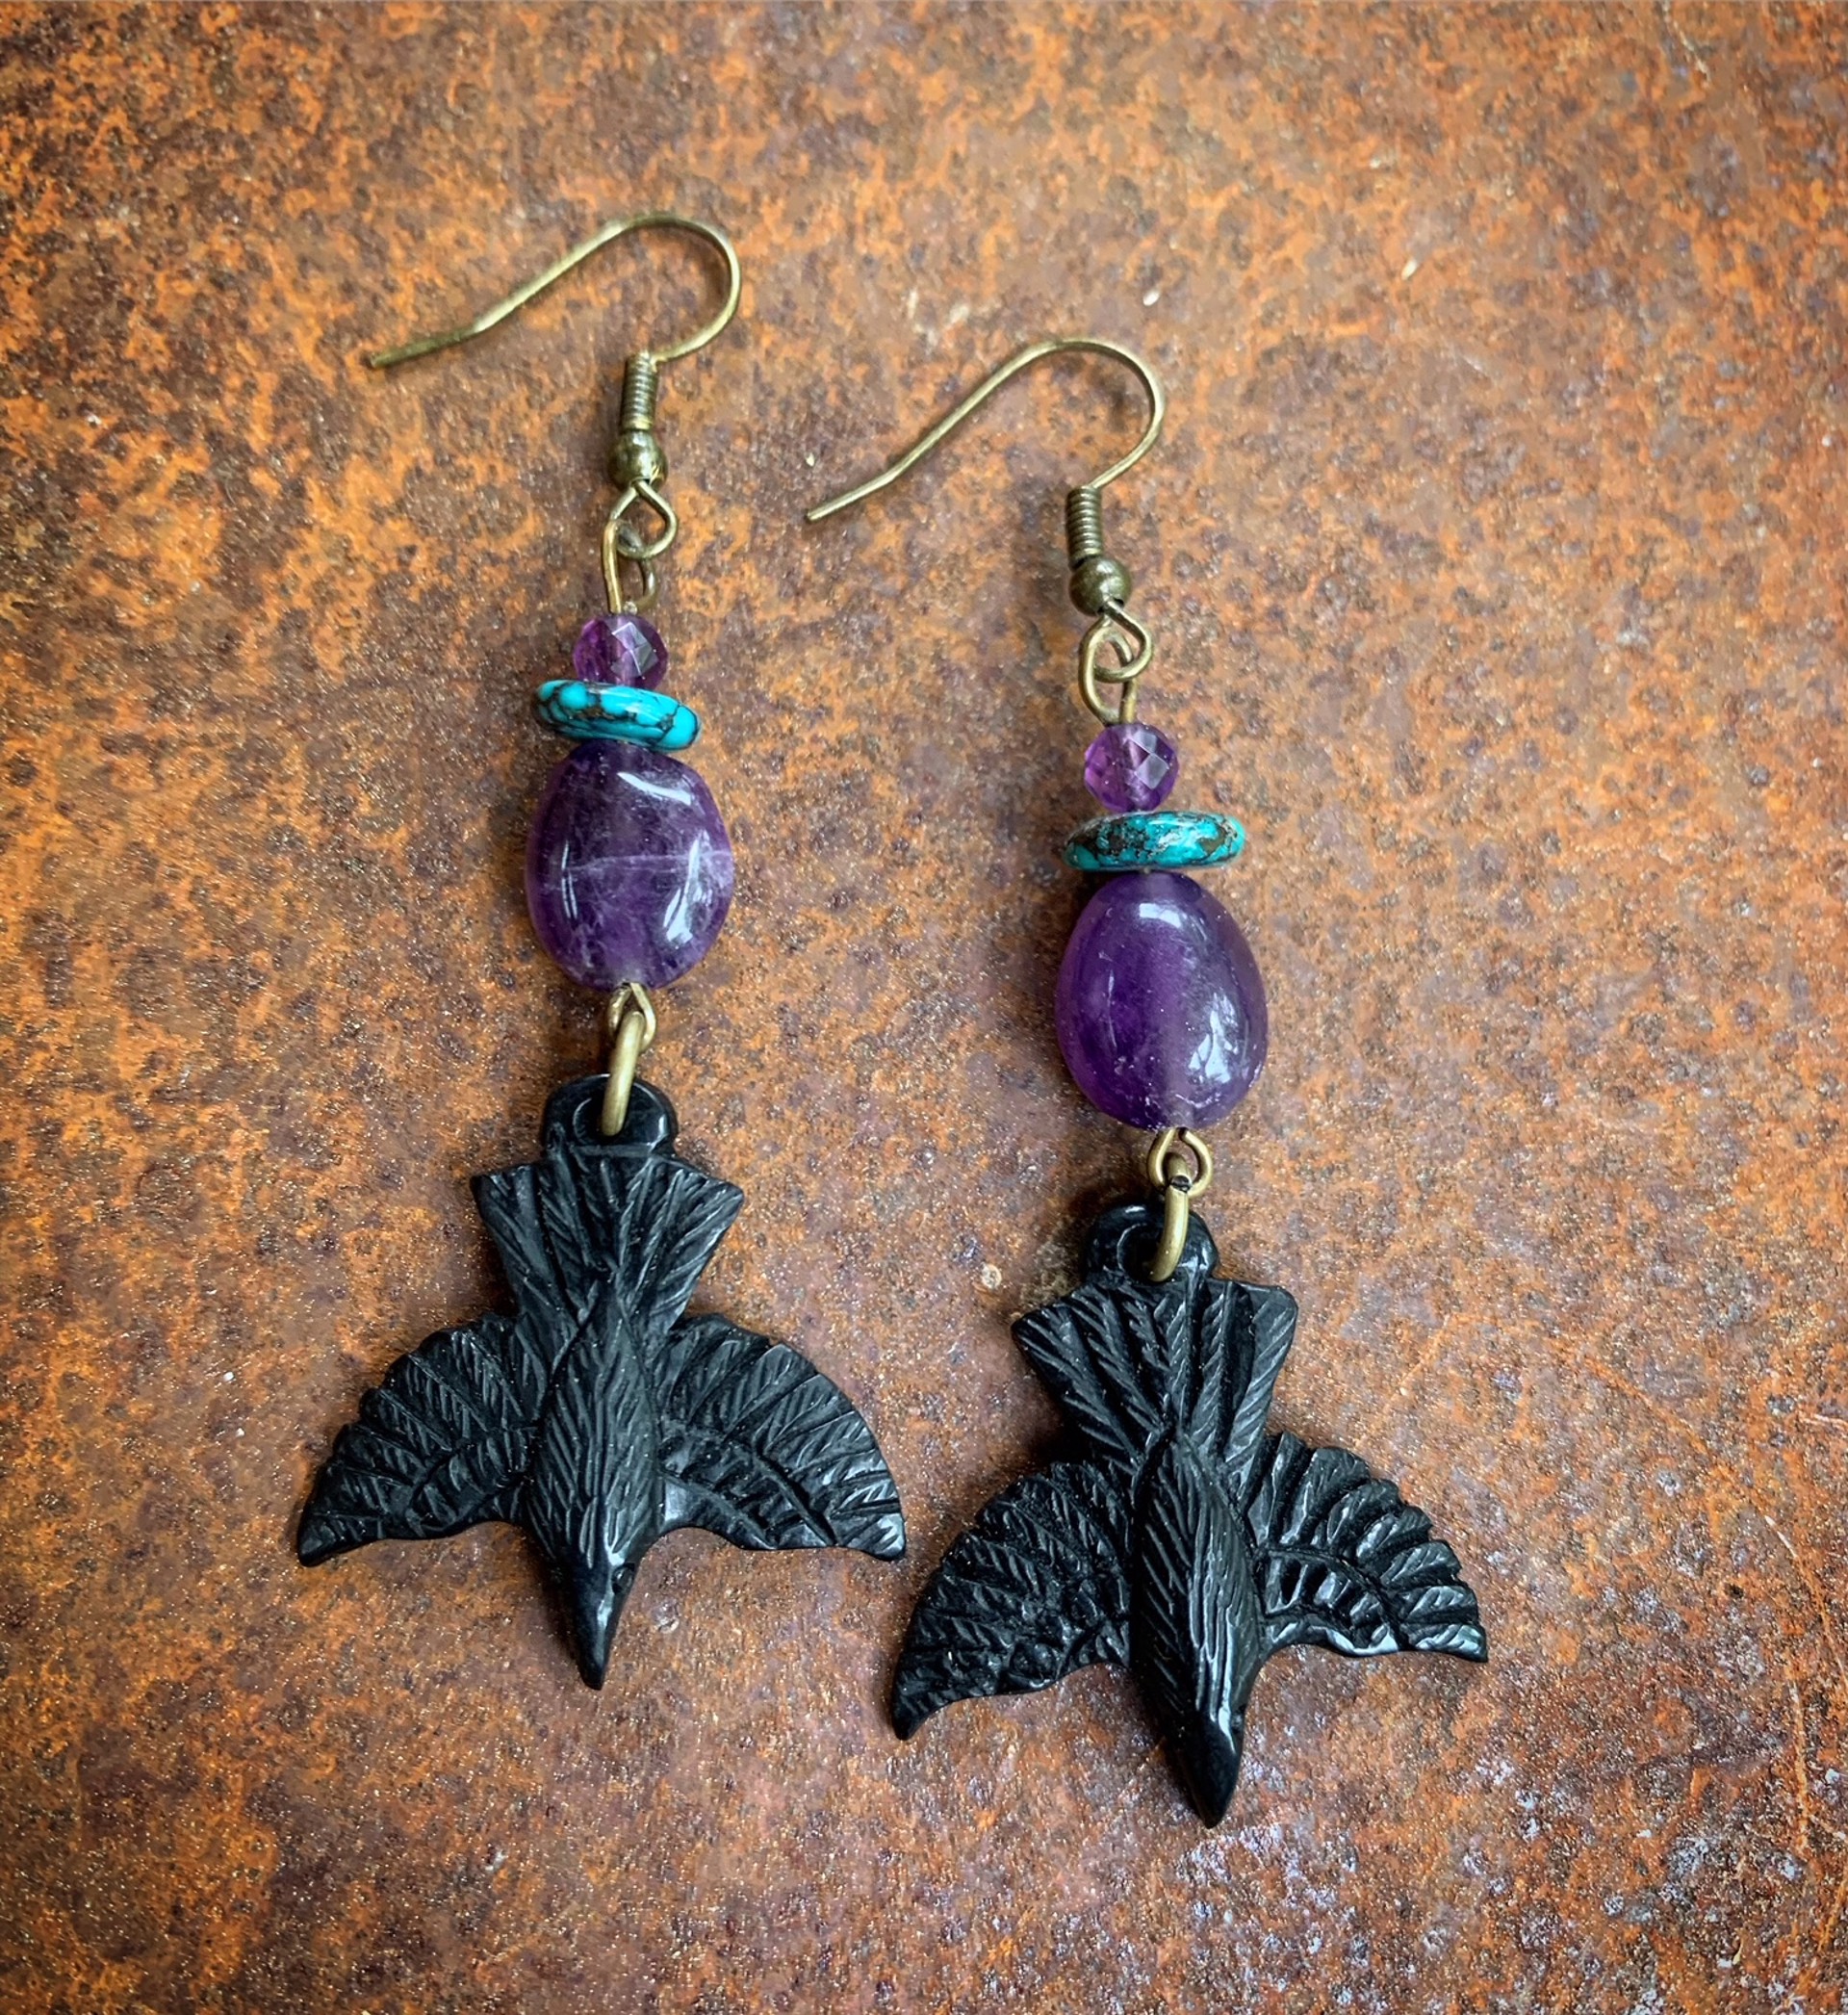 K861 Carved Buffalo Horn Raven Earrings with Turquoise and Amethyst by Kelly Ormsby